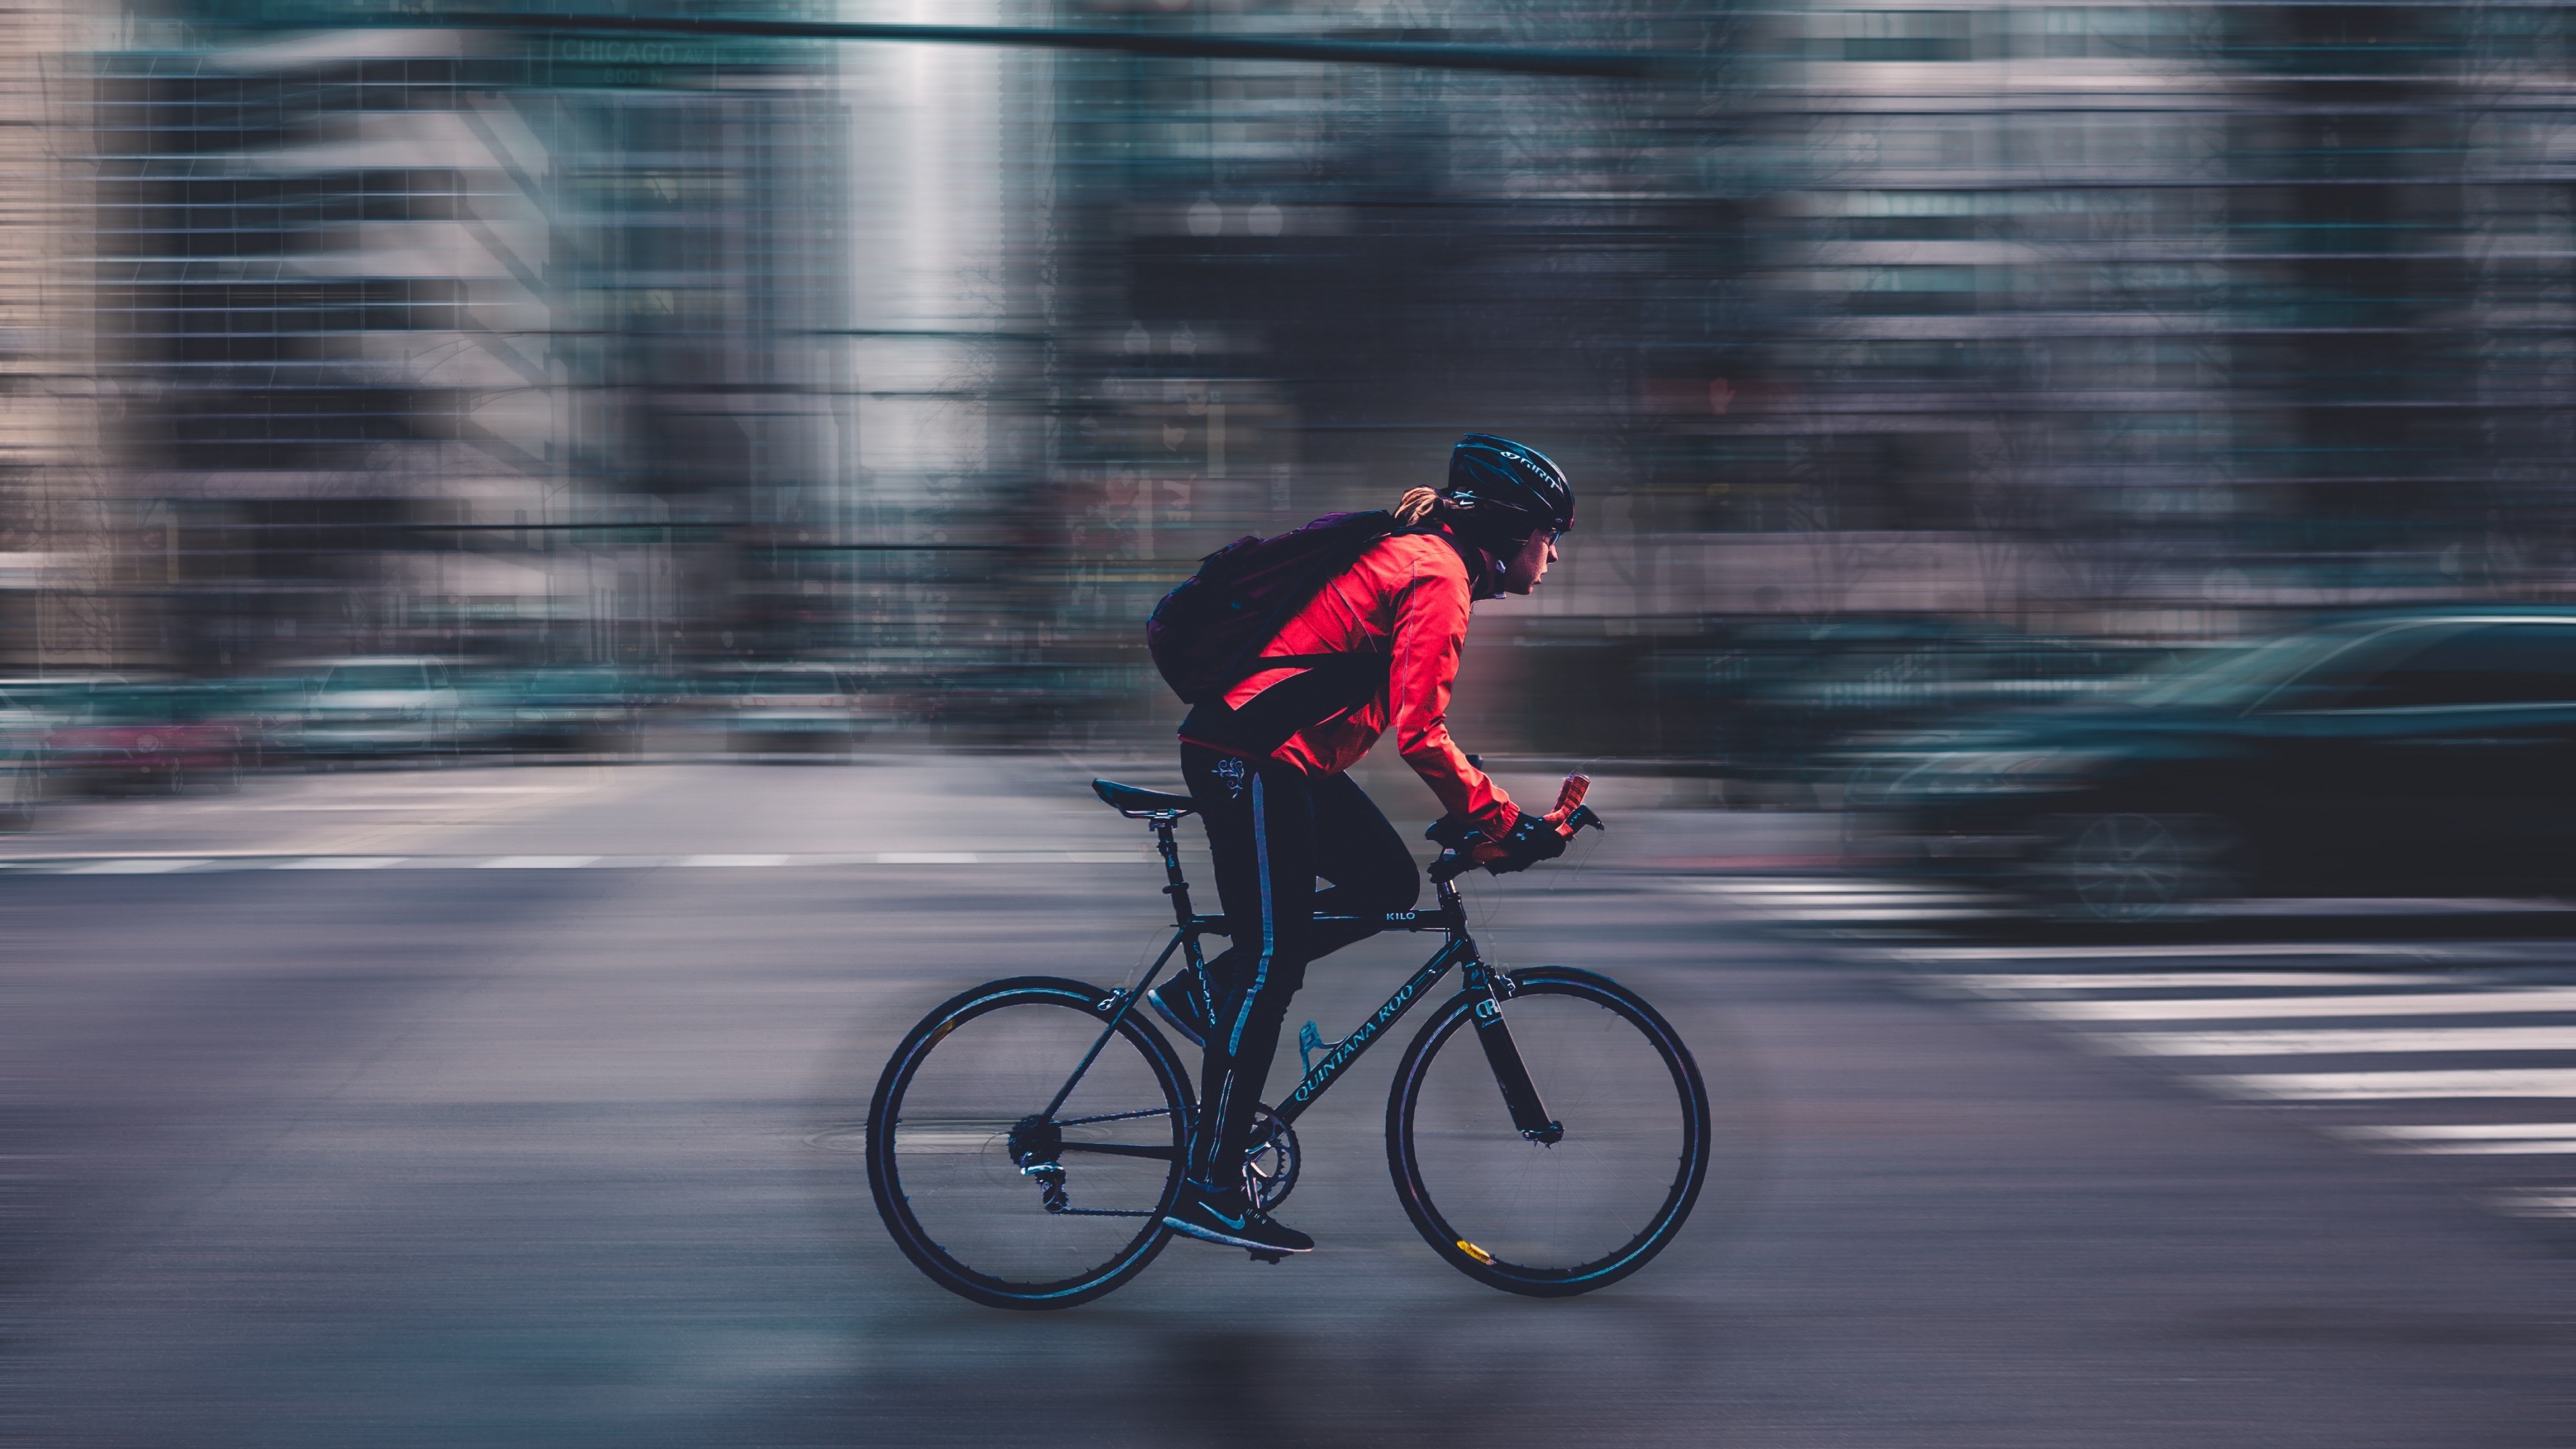 Man in Red Jacket Riding Bicycle Sur Route Pendant la Journée. Wallpaper in 3840x2160 Resolution